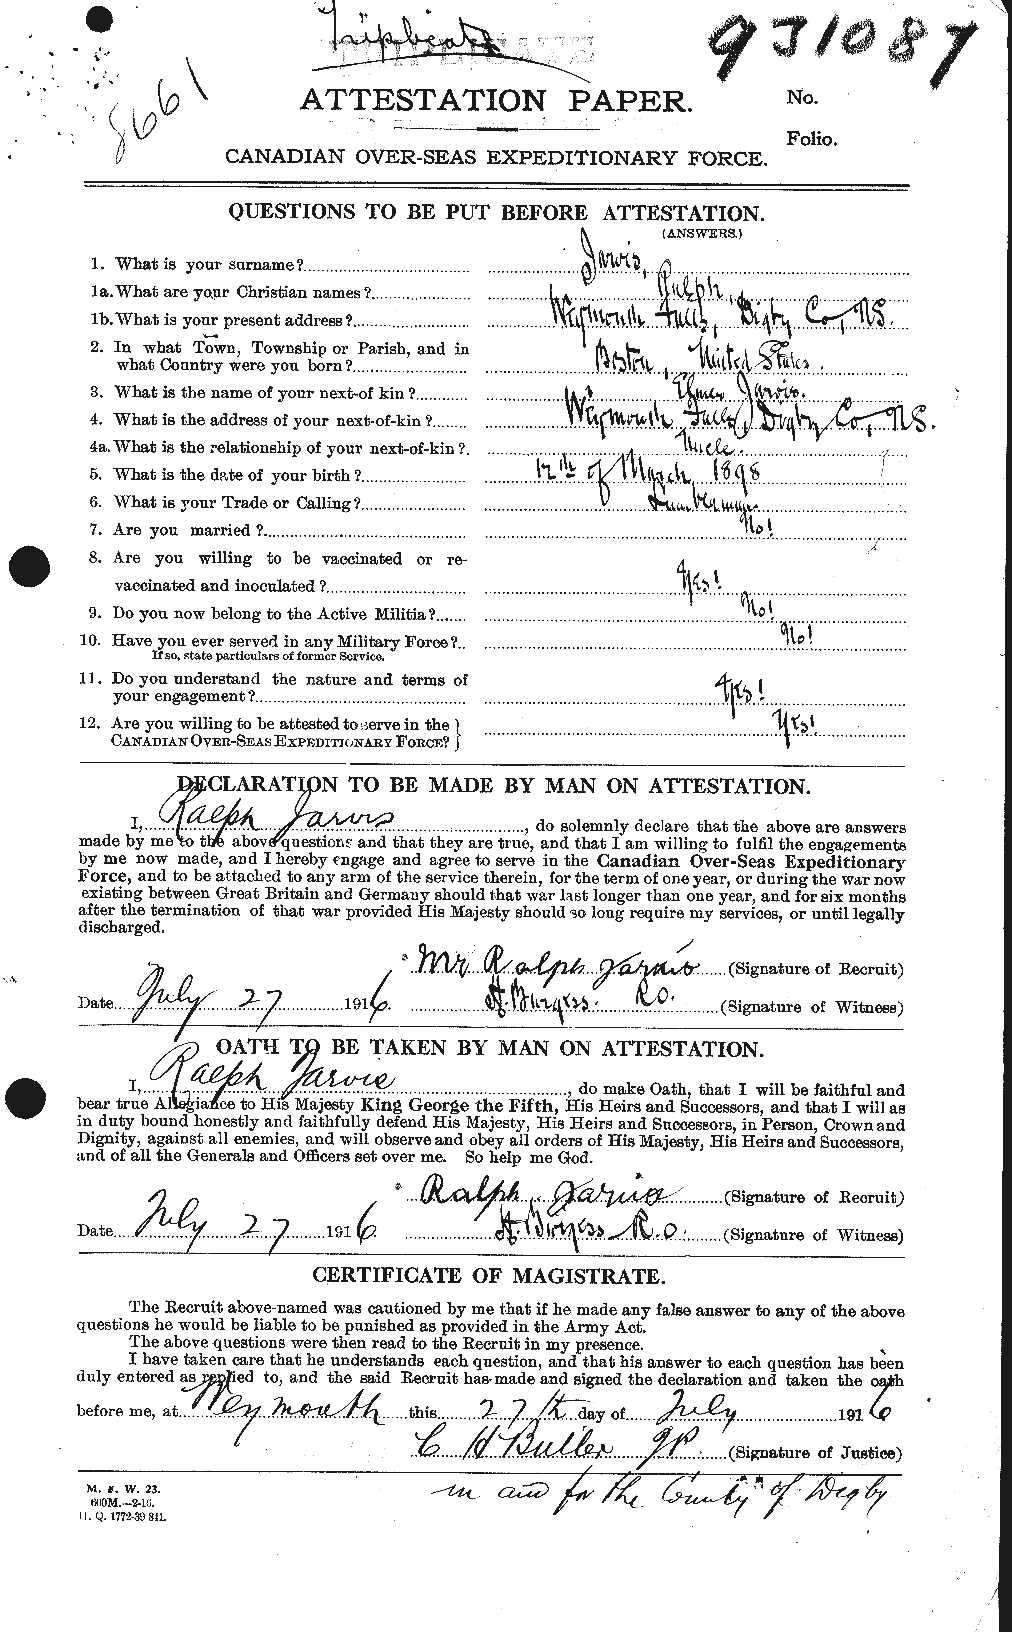 Personnel Records of the First World War - CEF 415844a